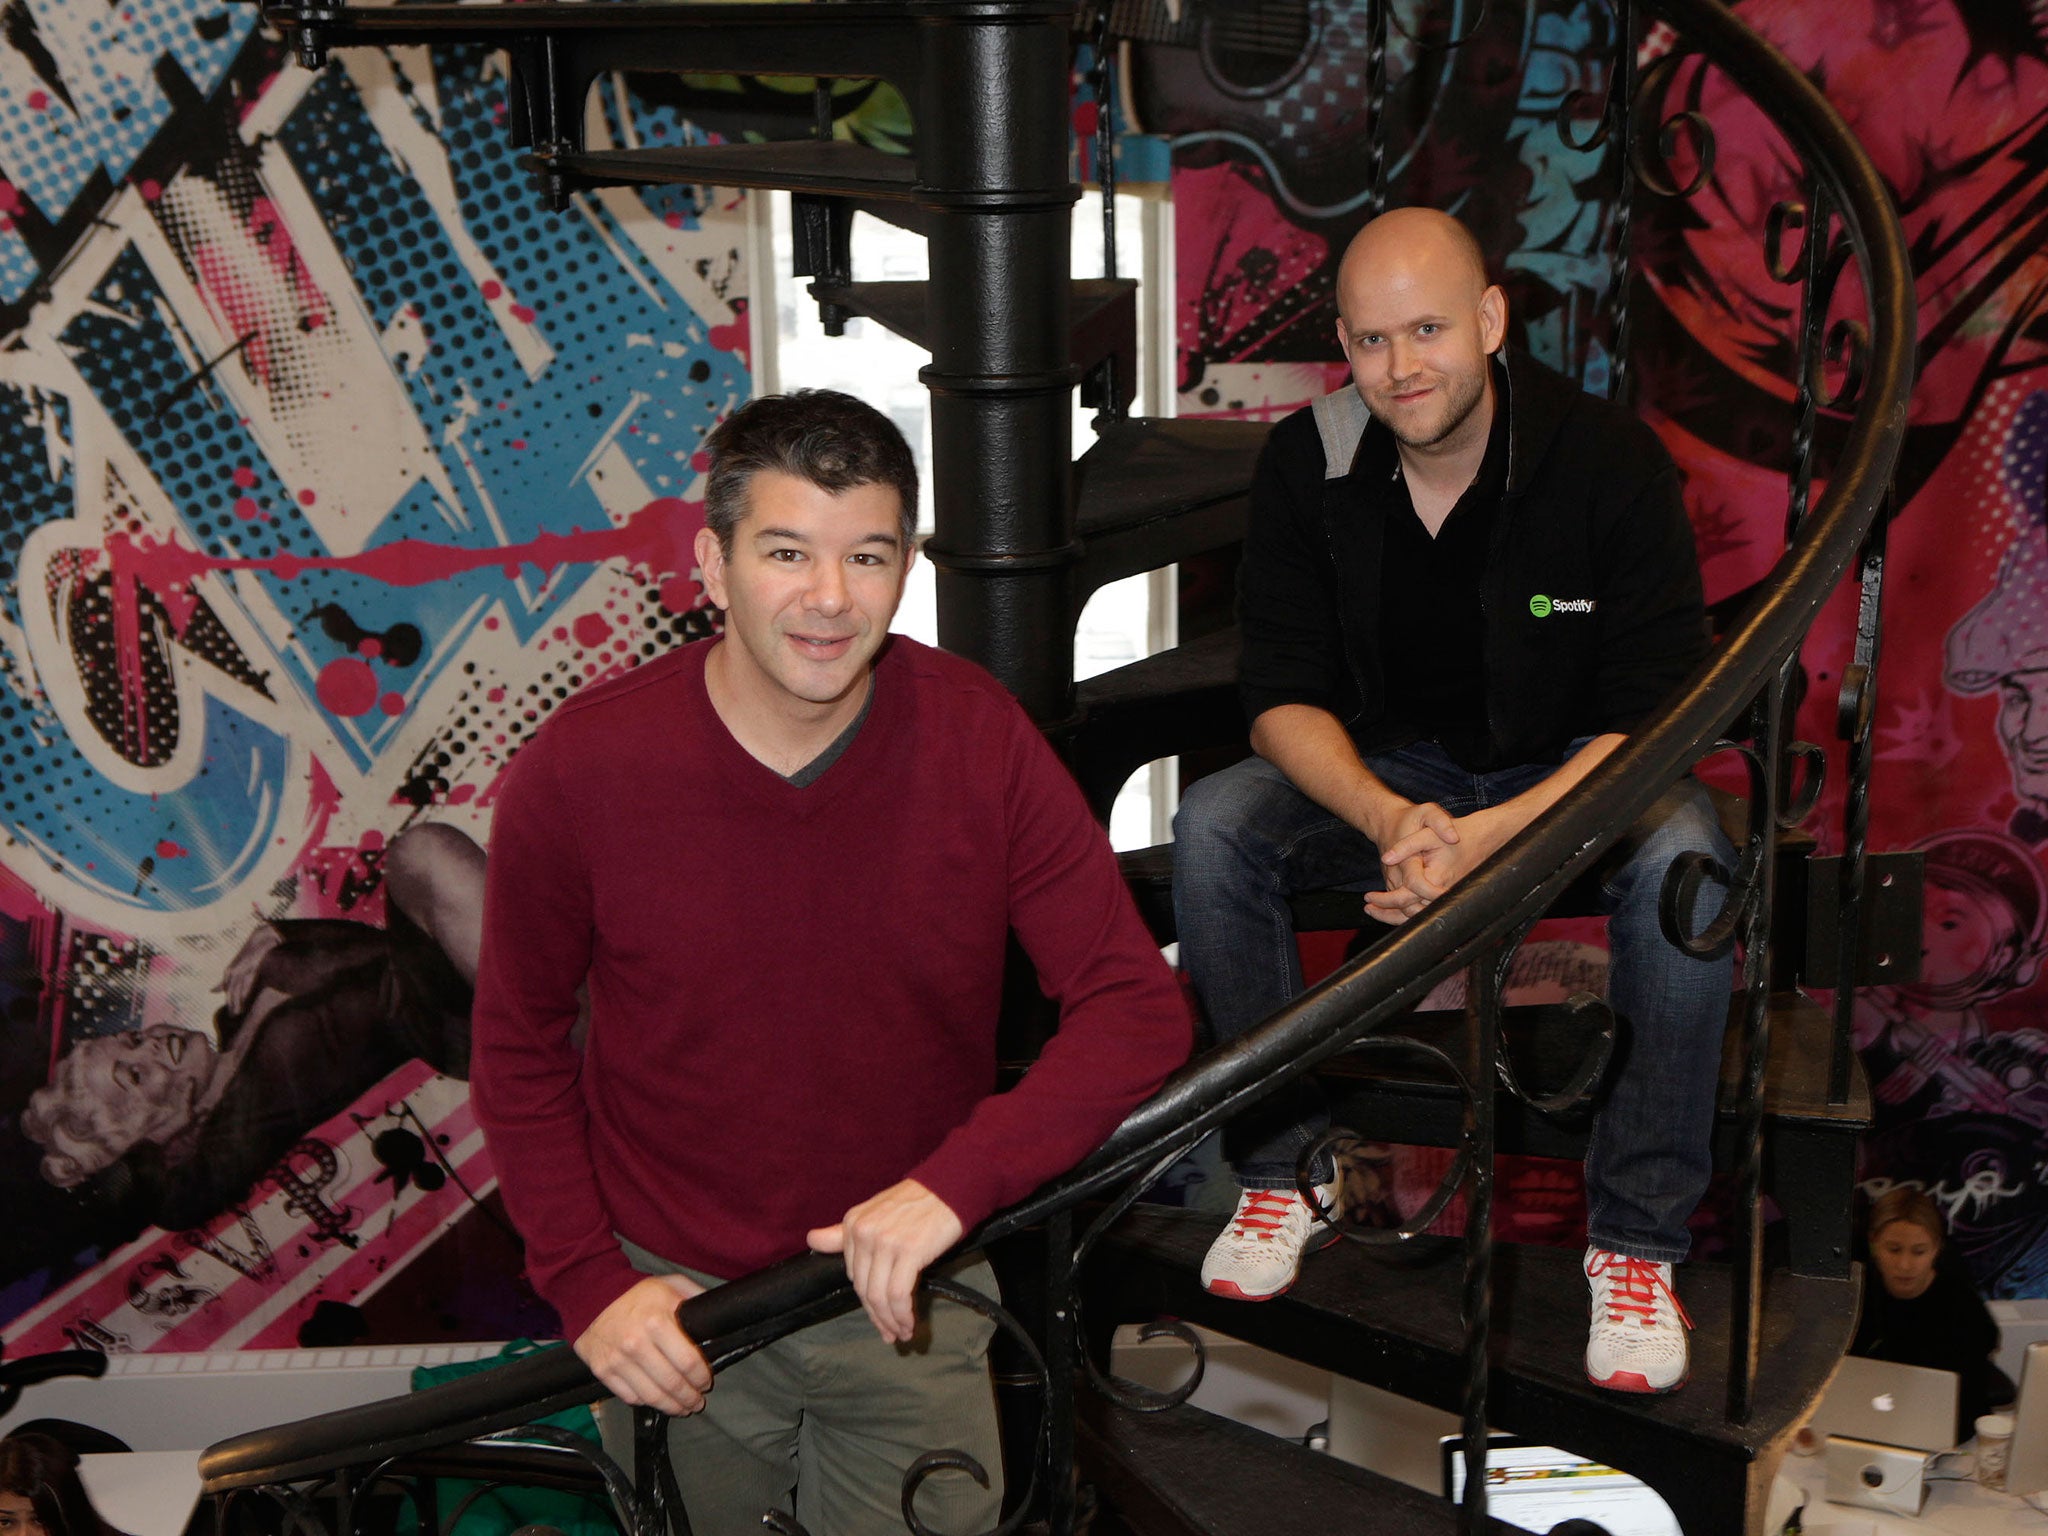 Uber Co-Founder & CEO Travis Kalanick and Spotify Founder & CEO Daniel Ek announced a new partnership enabling users to soundtrack their Uber ride